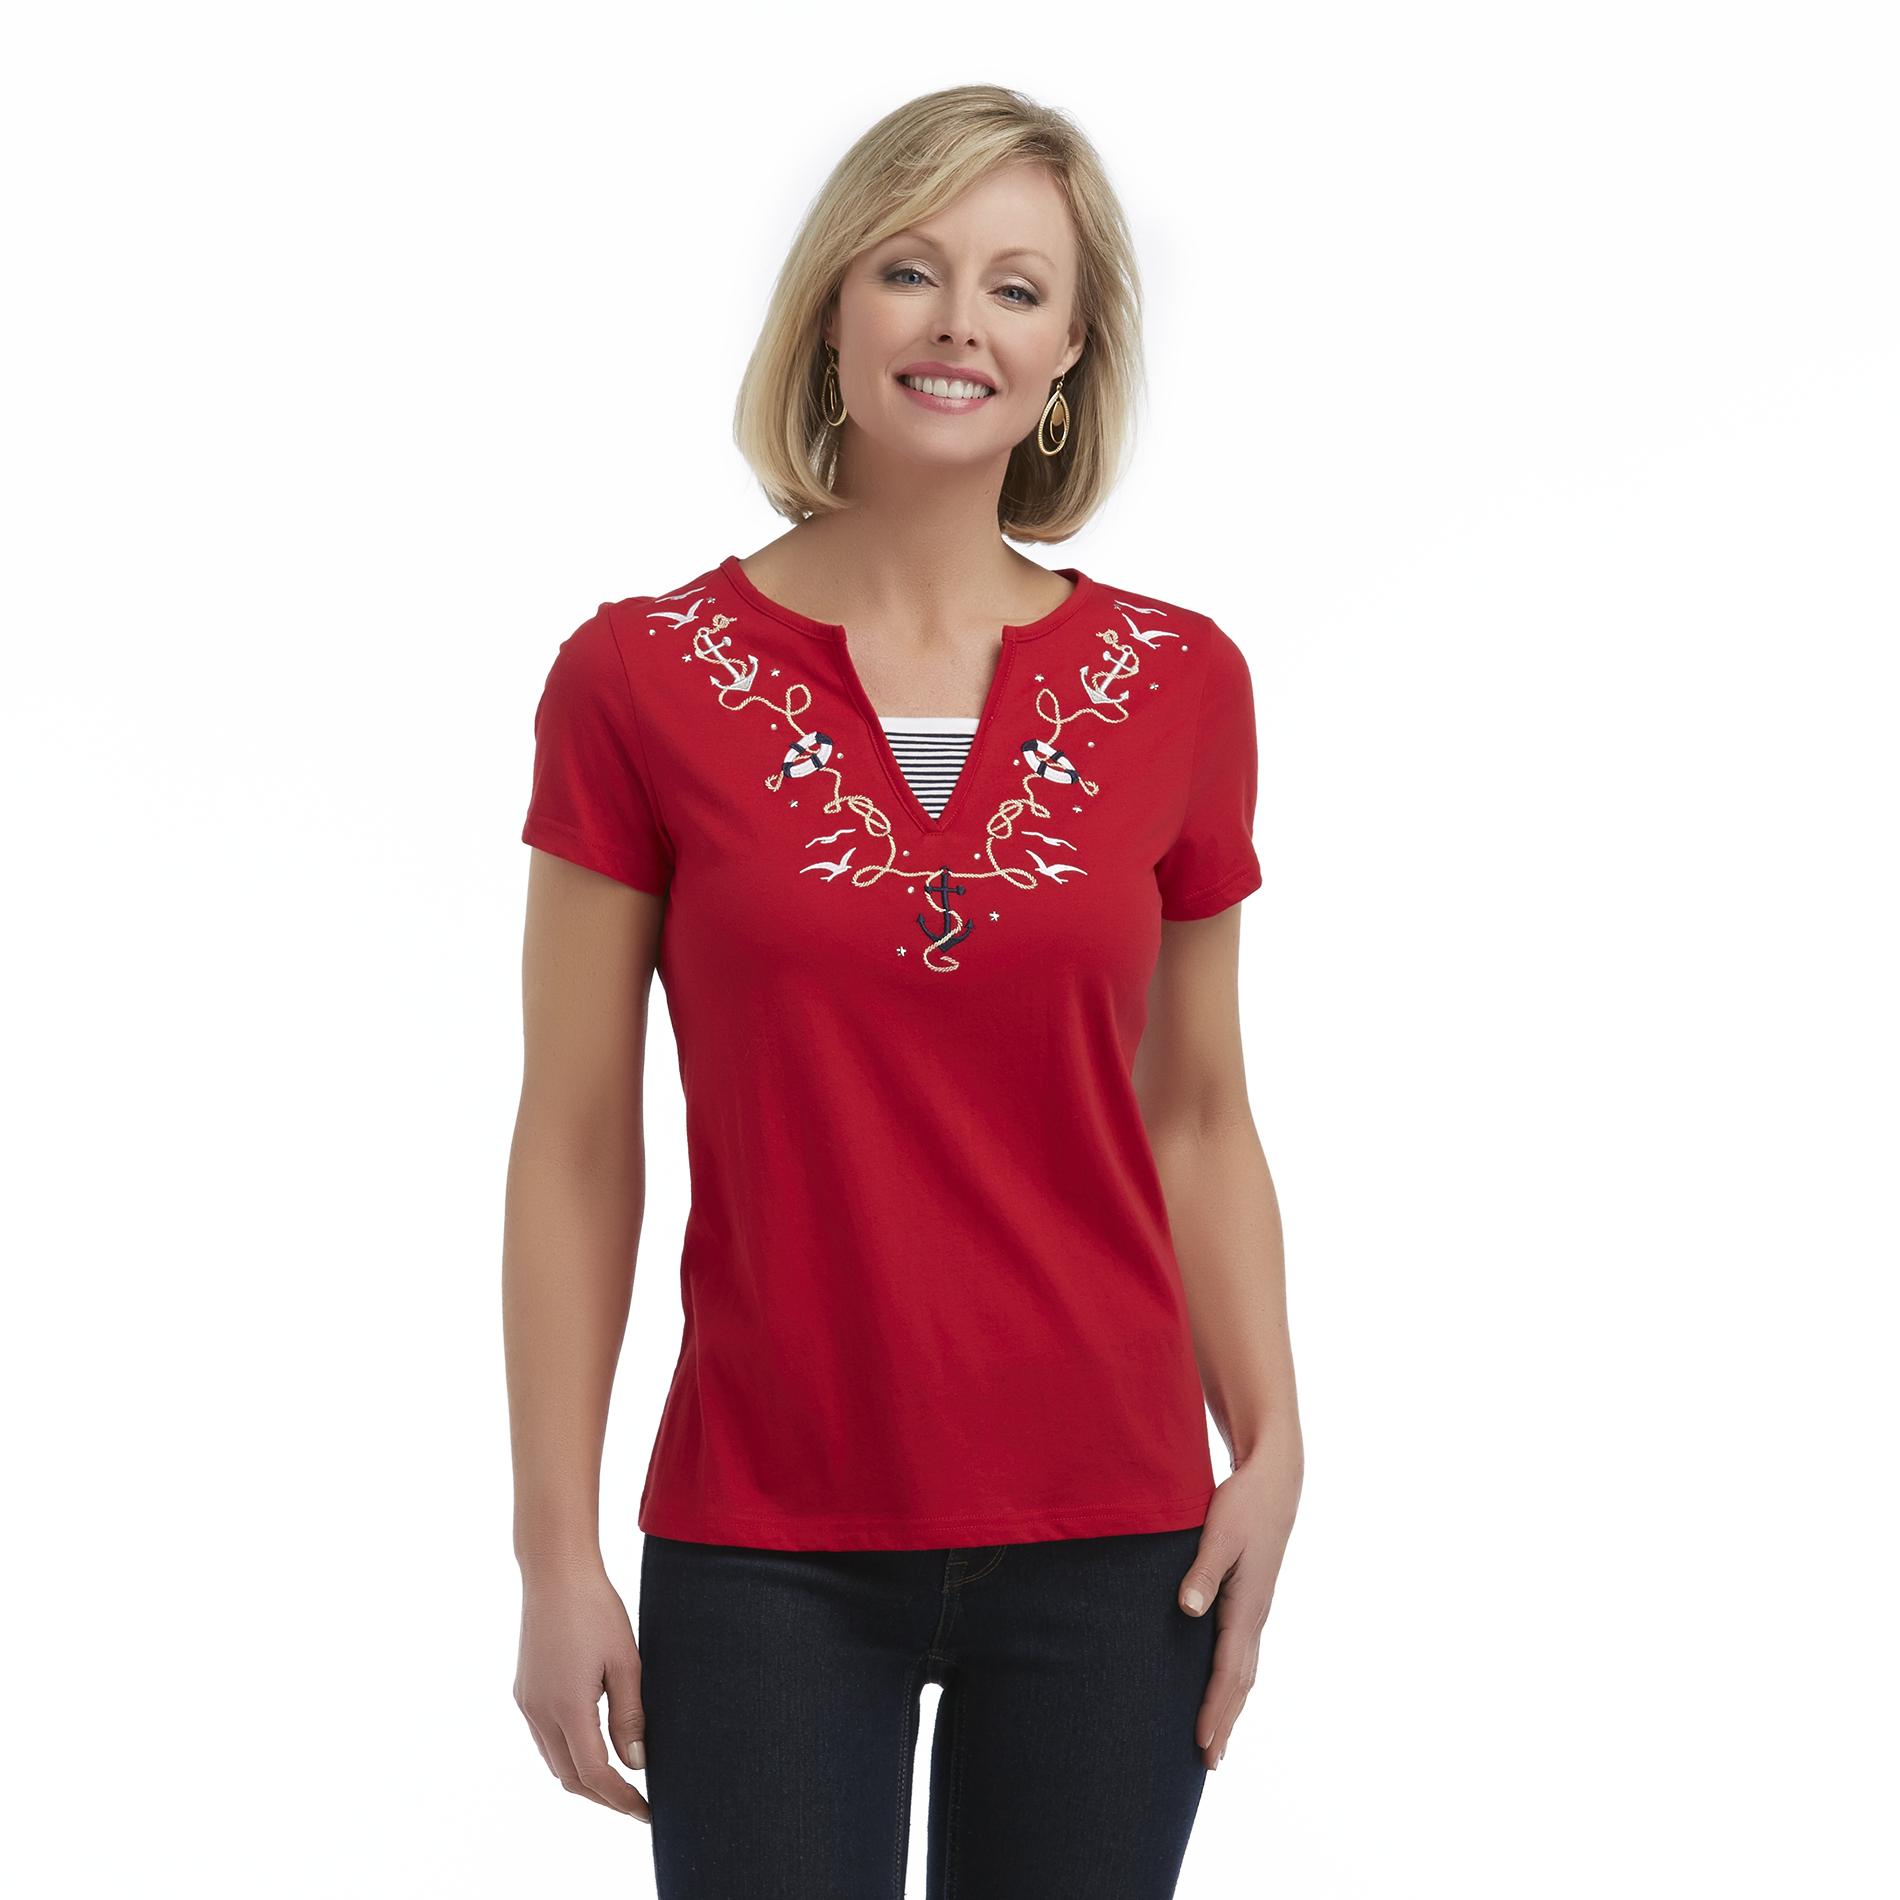 Holiday Editions Women's Layered Look T-Shirt - Nautical